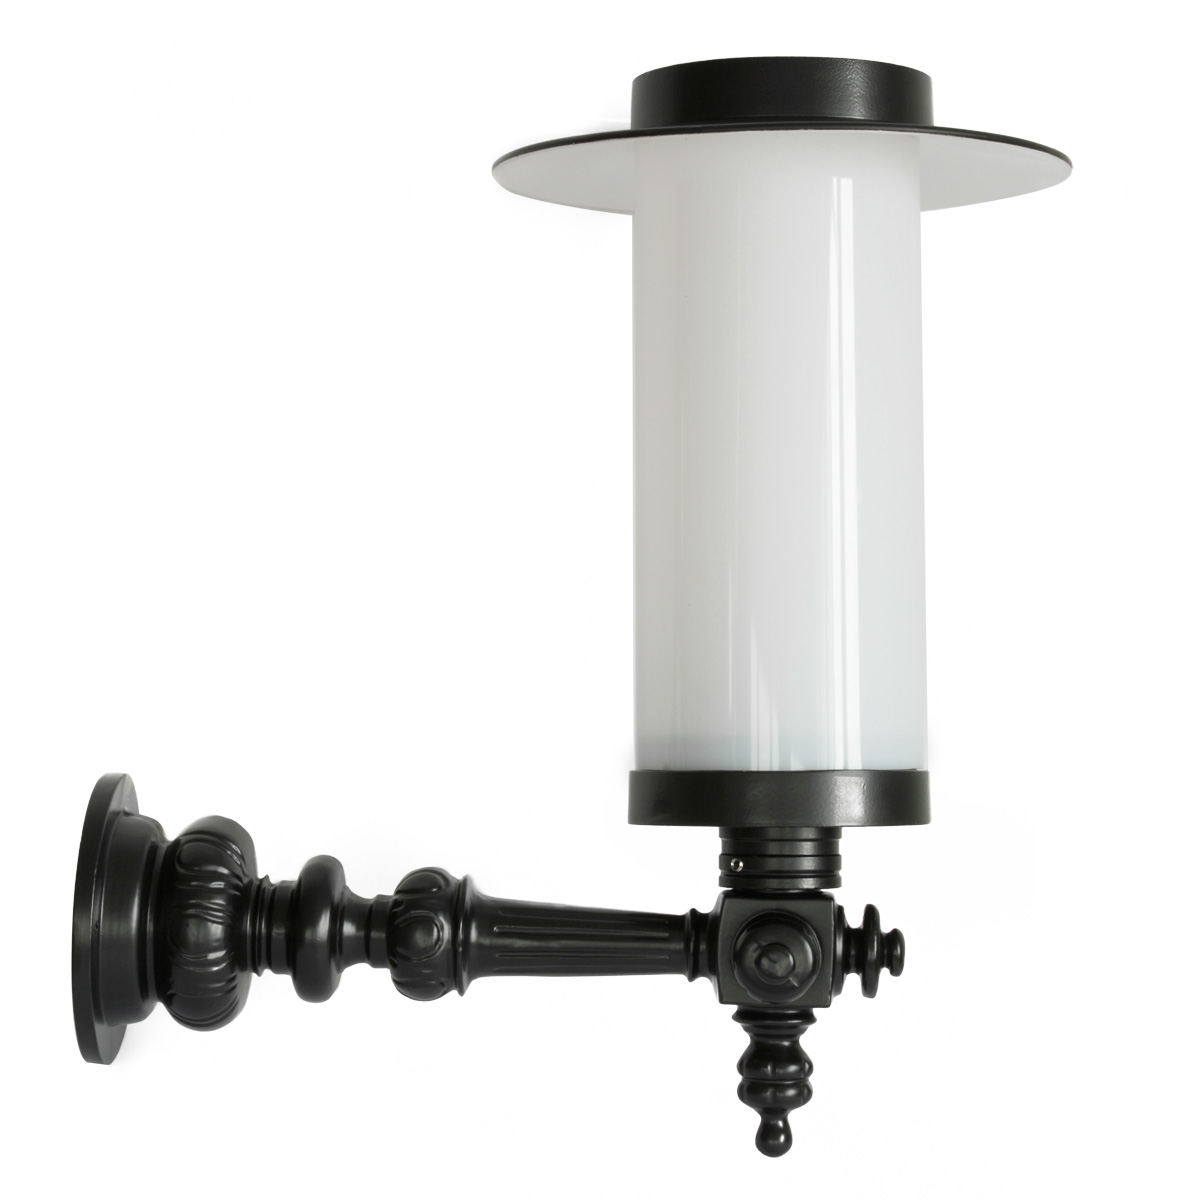 Shaded cylindrical light with wall bracket Danzig S/M.37 A3.B3